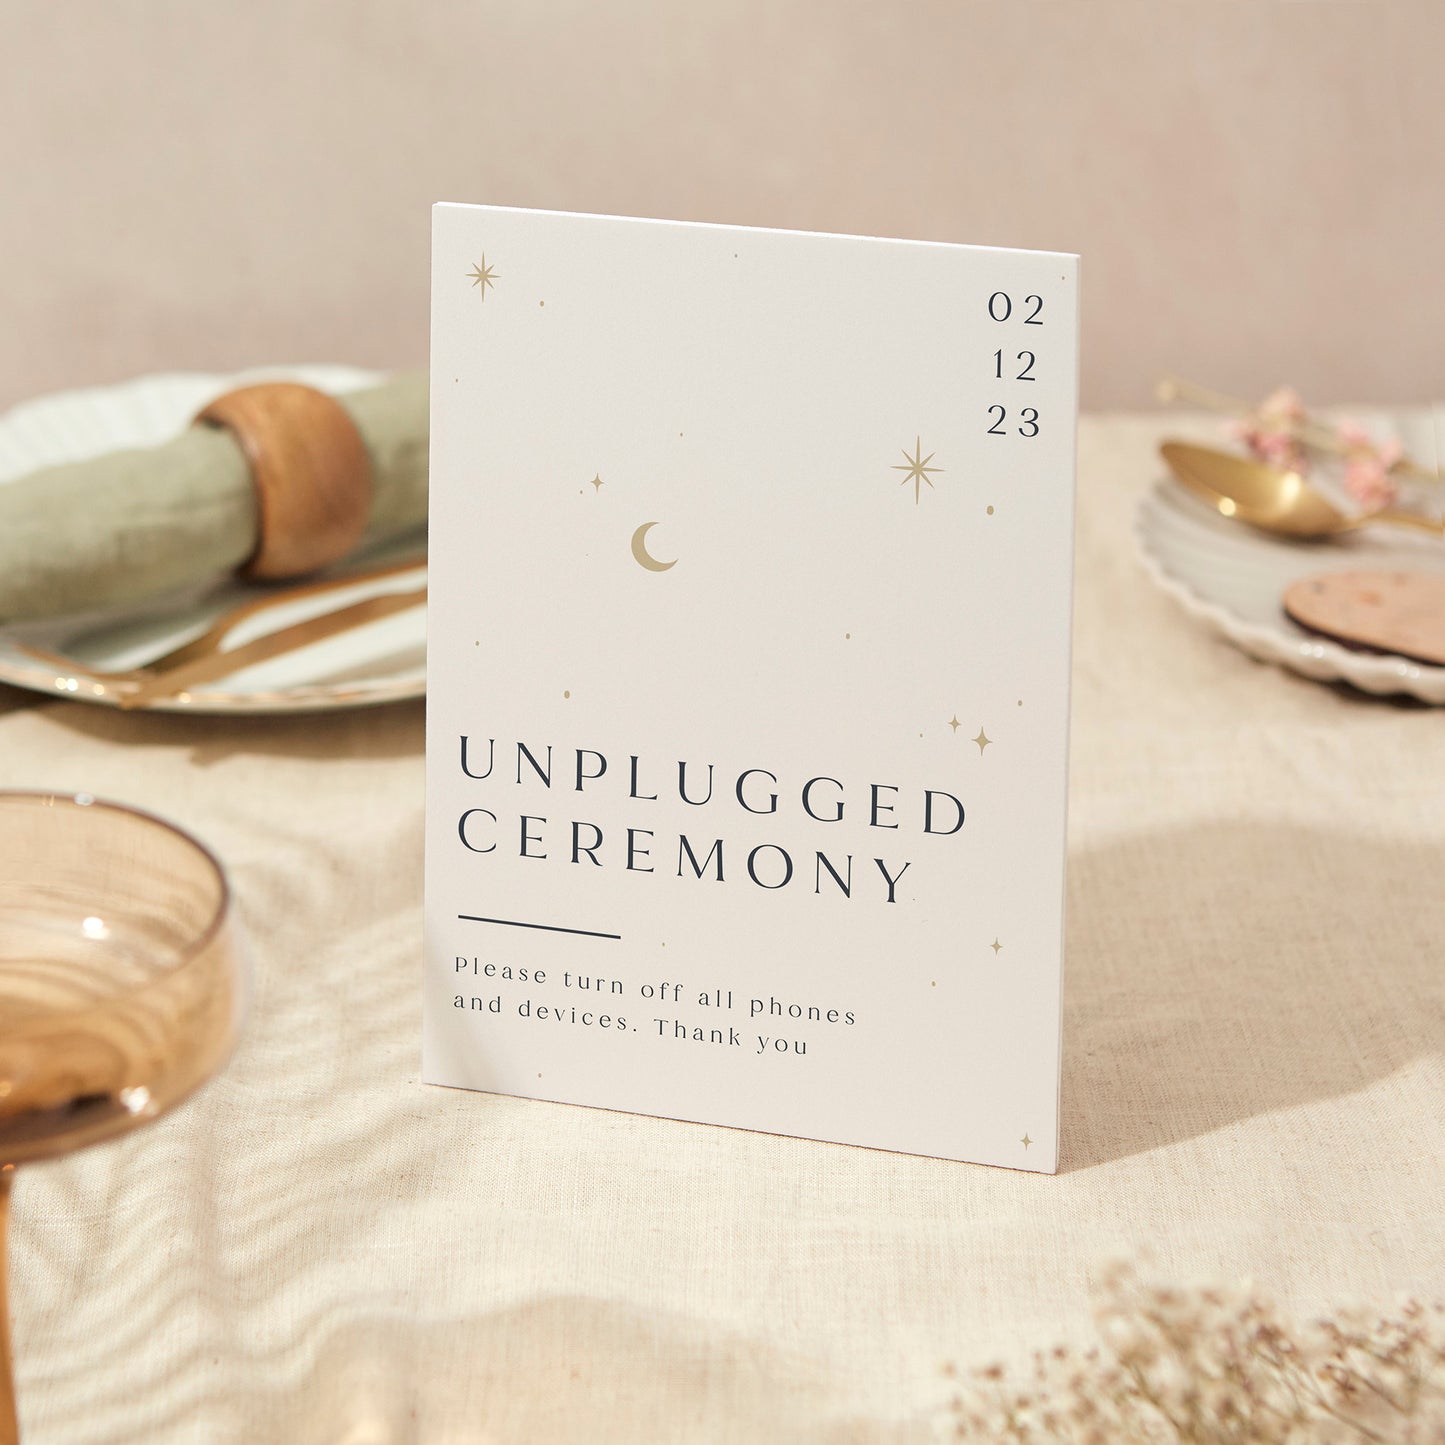 Unplugged Ceremony Sign Wedding Sign A4 Sturdy Foamex Sign Celestial Night Sky